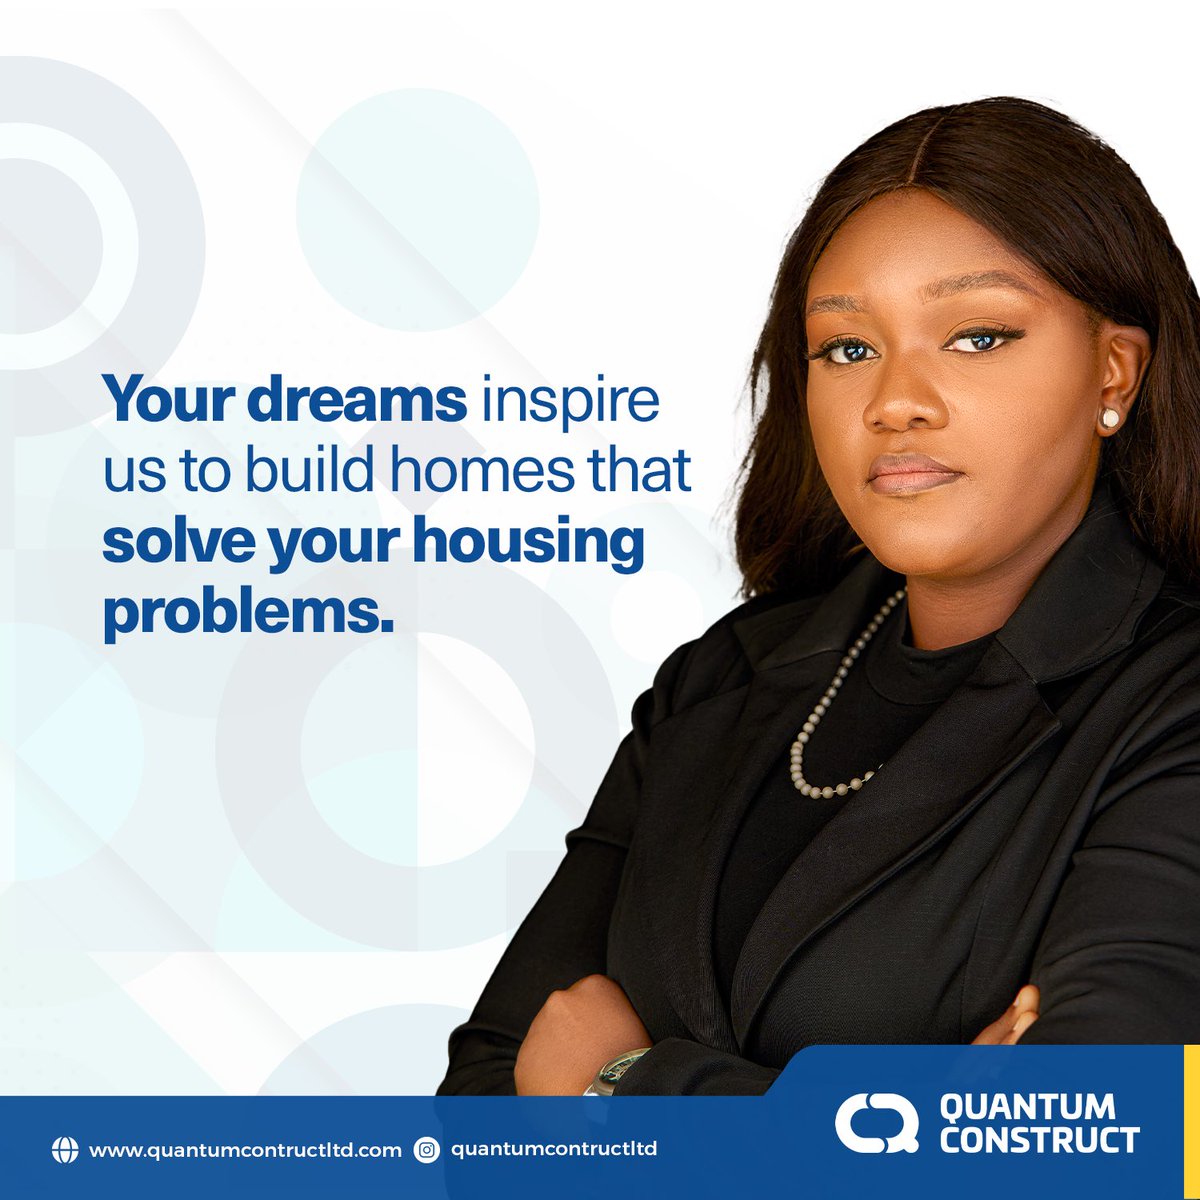 Our proven success speaks for itself.

We build homes that are tailored to your specific lifestyle.

Join our community of satisfied homeowners today to see why we're the trusted choice.

#quantummeansquality #quality #trust #quantumconstructltd #quantumtotheworld #affordablehome